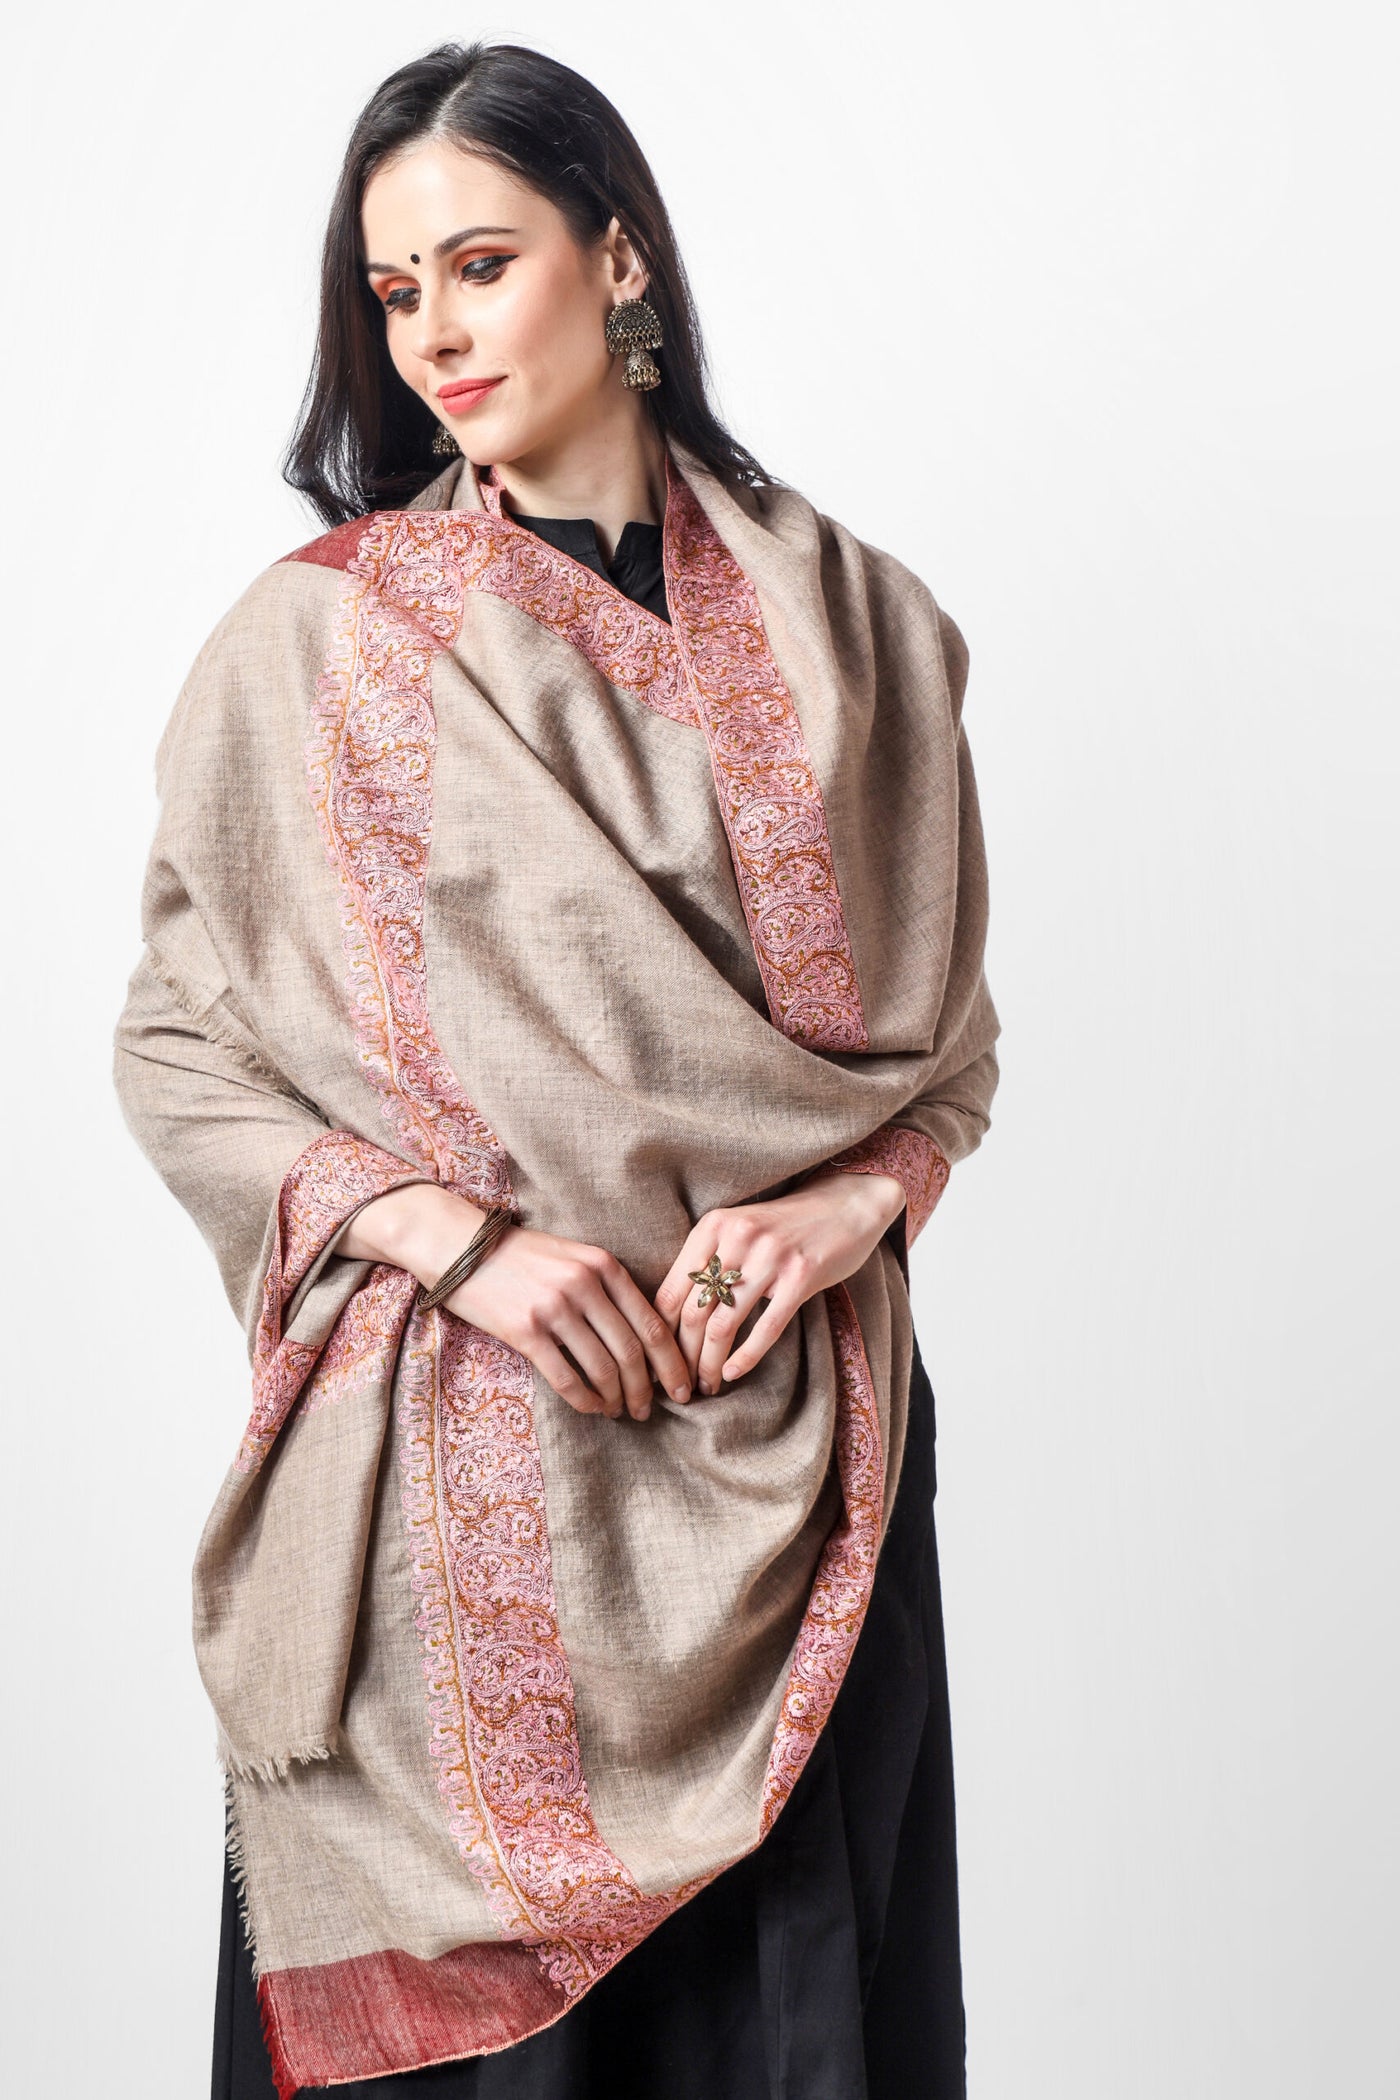 This authentic,  natural handwoven, handloom, handmade, Kashmiri Pashmina Shawl is crafted with meticulous attention to detail, made with natural cashmere fibers, adding to its soft  texture, perfect for keeping you cozy during chilly days. Embrace the warmth, luxury and elegance of this shawl